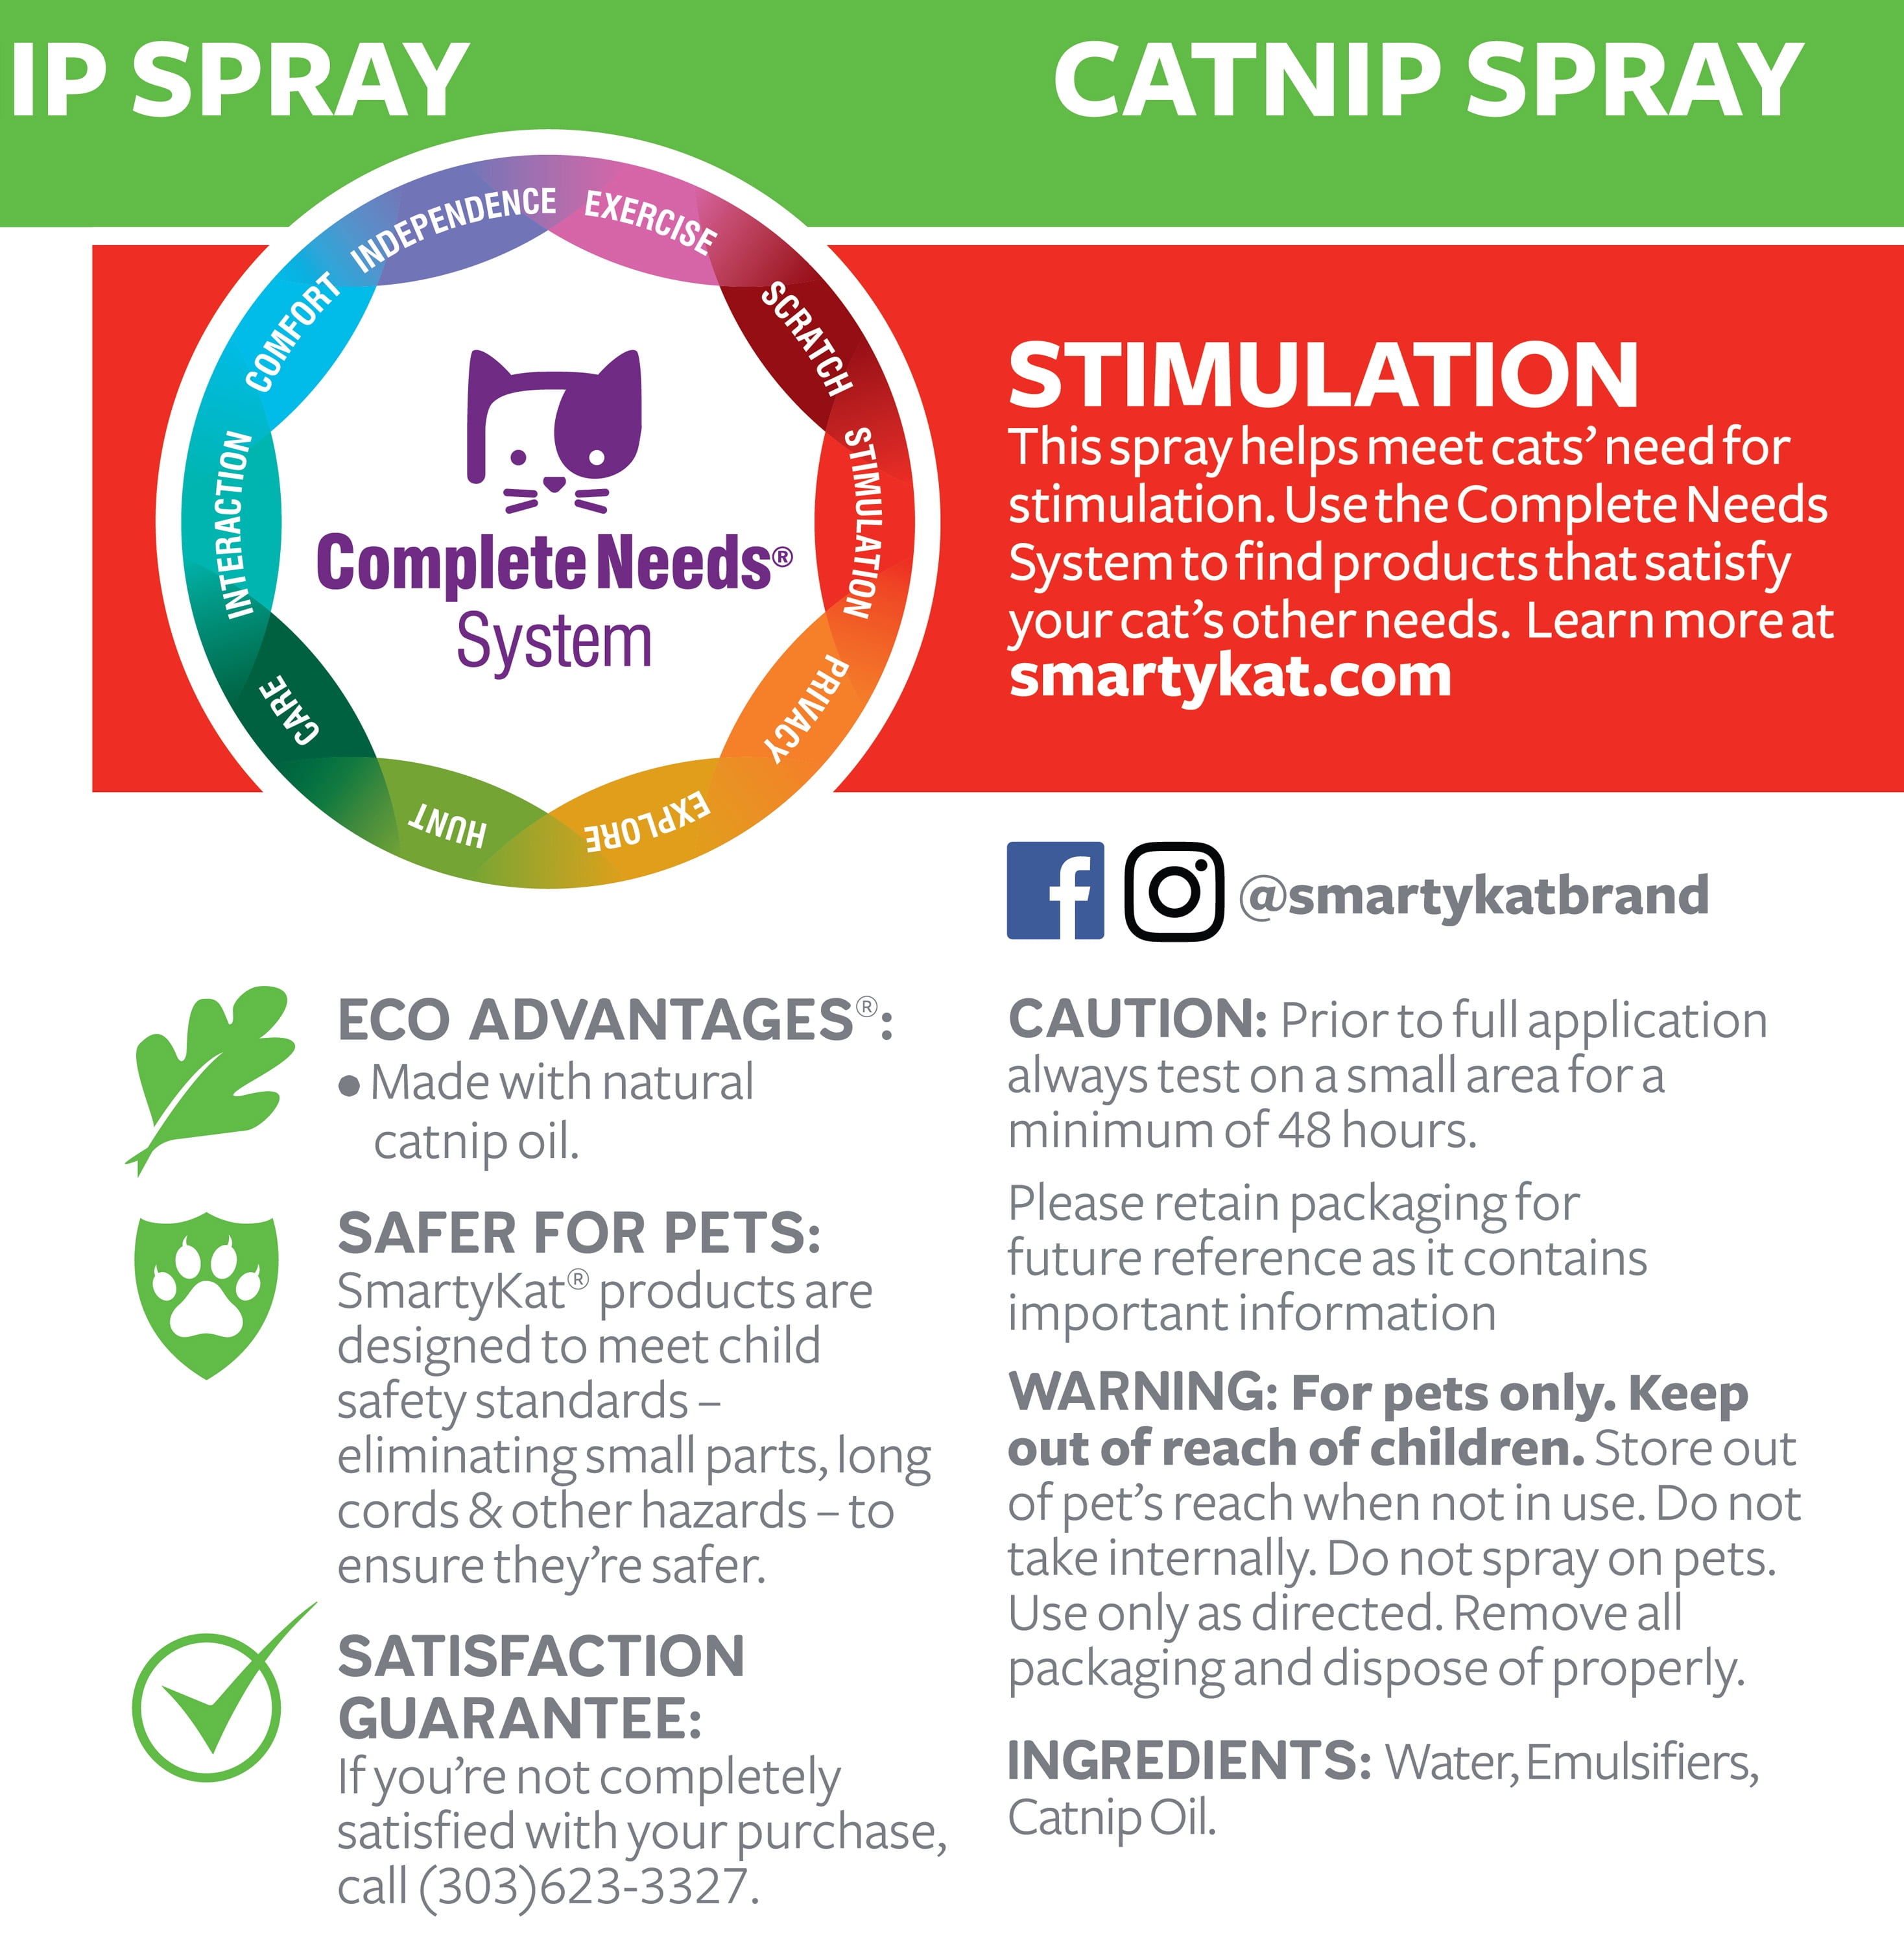 SmartyKat CATNIP MIST Spray Attracts Your Cat to Toys, Beds & Scratchers 7  oz.